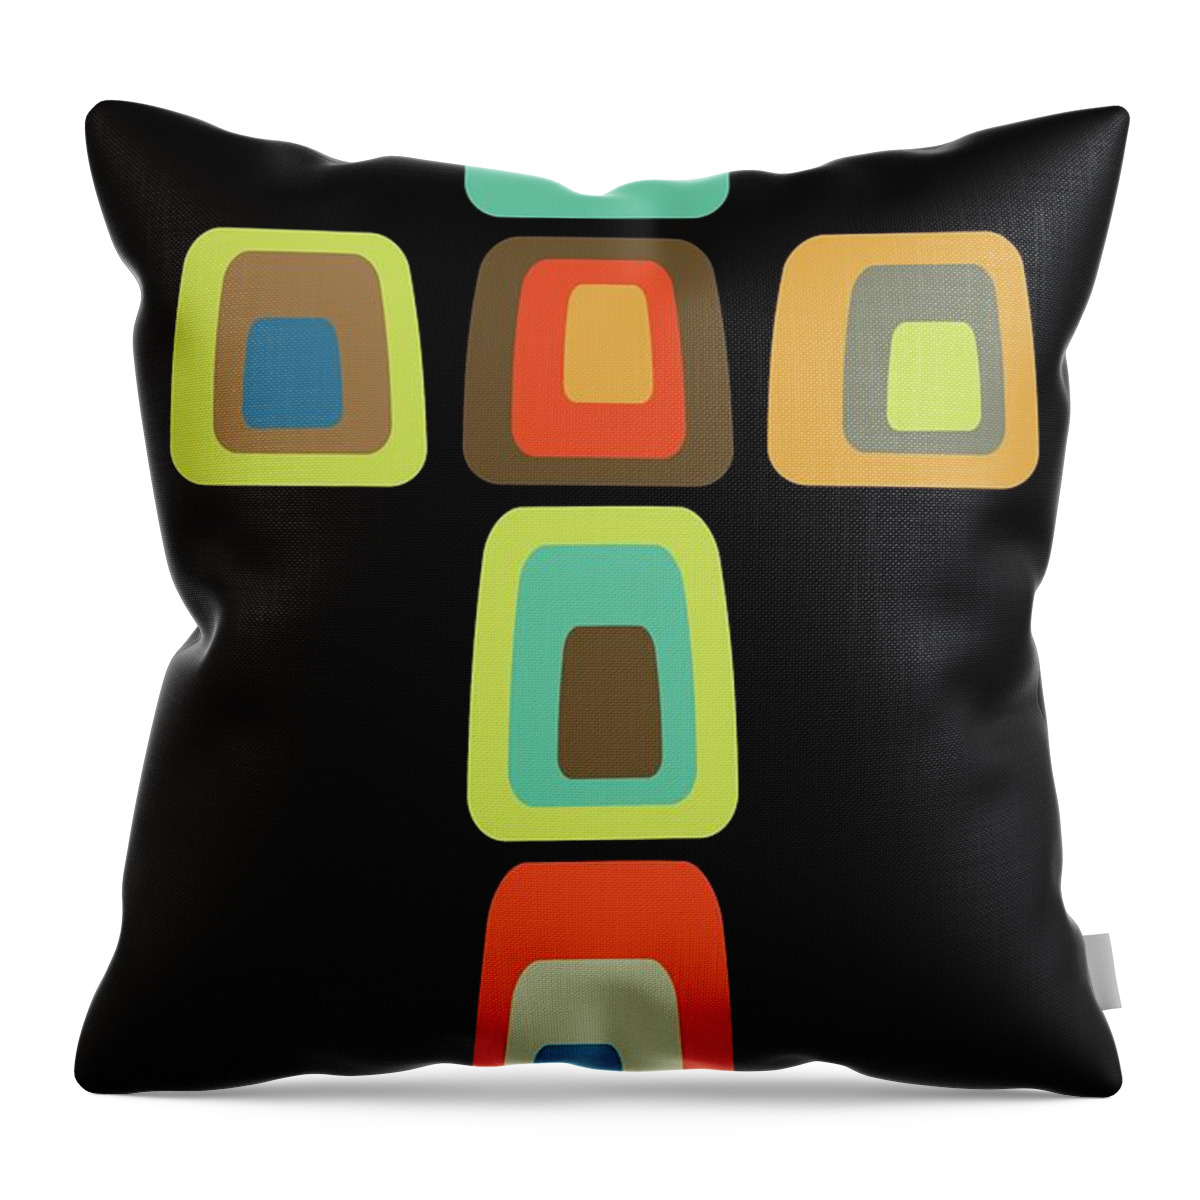 Christian Throw Pillow featuring the digital art Mid Century Modern Oblong Cross by Donna Mibus